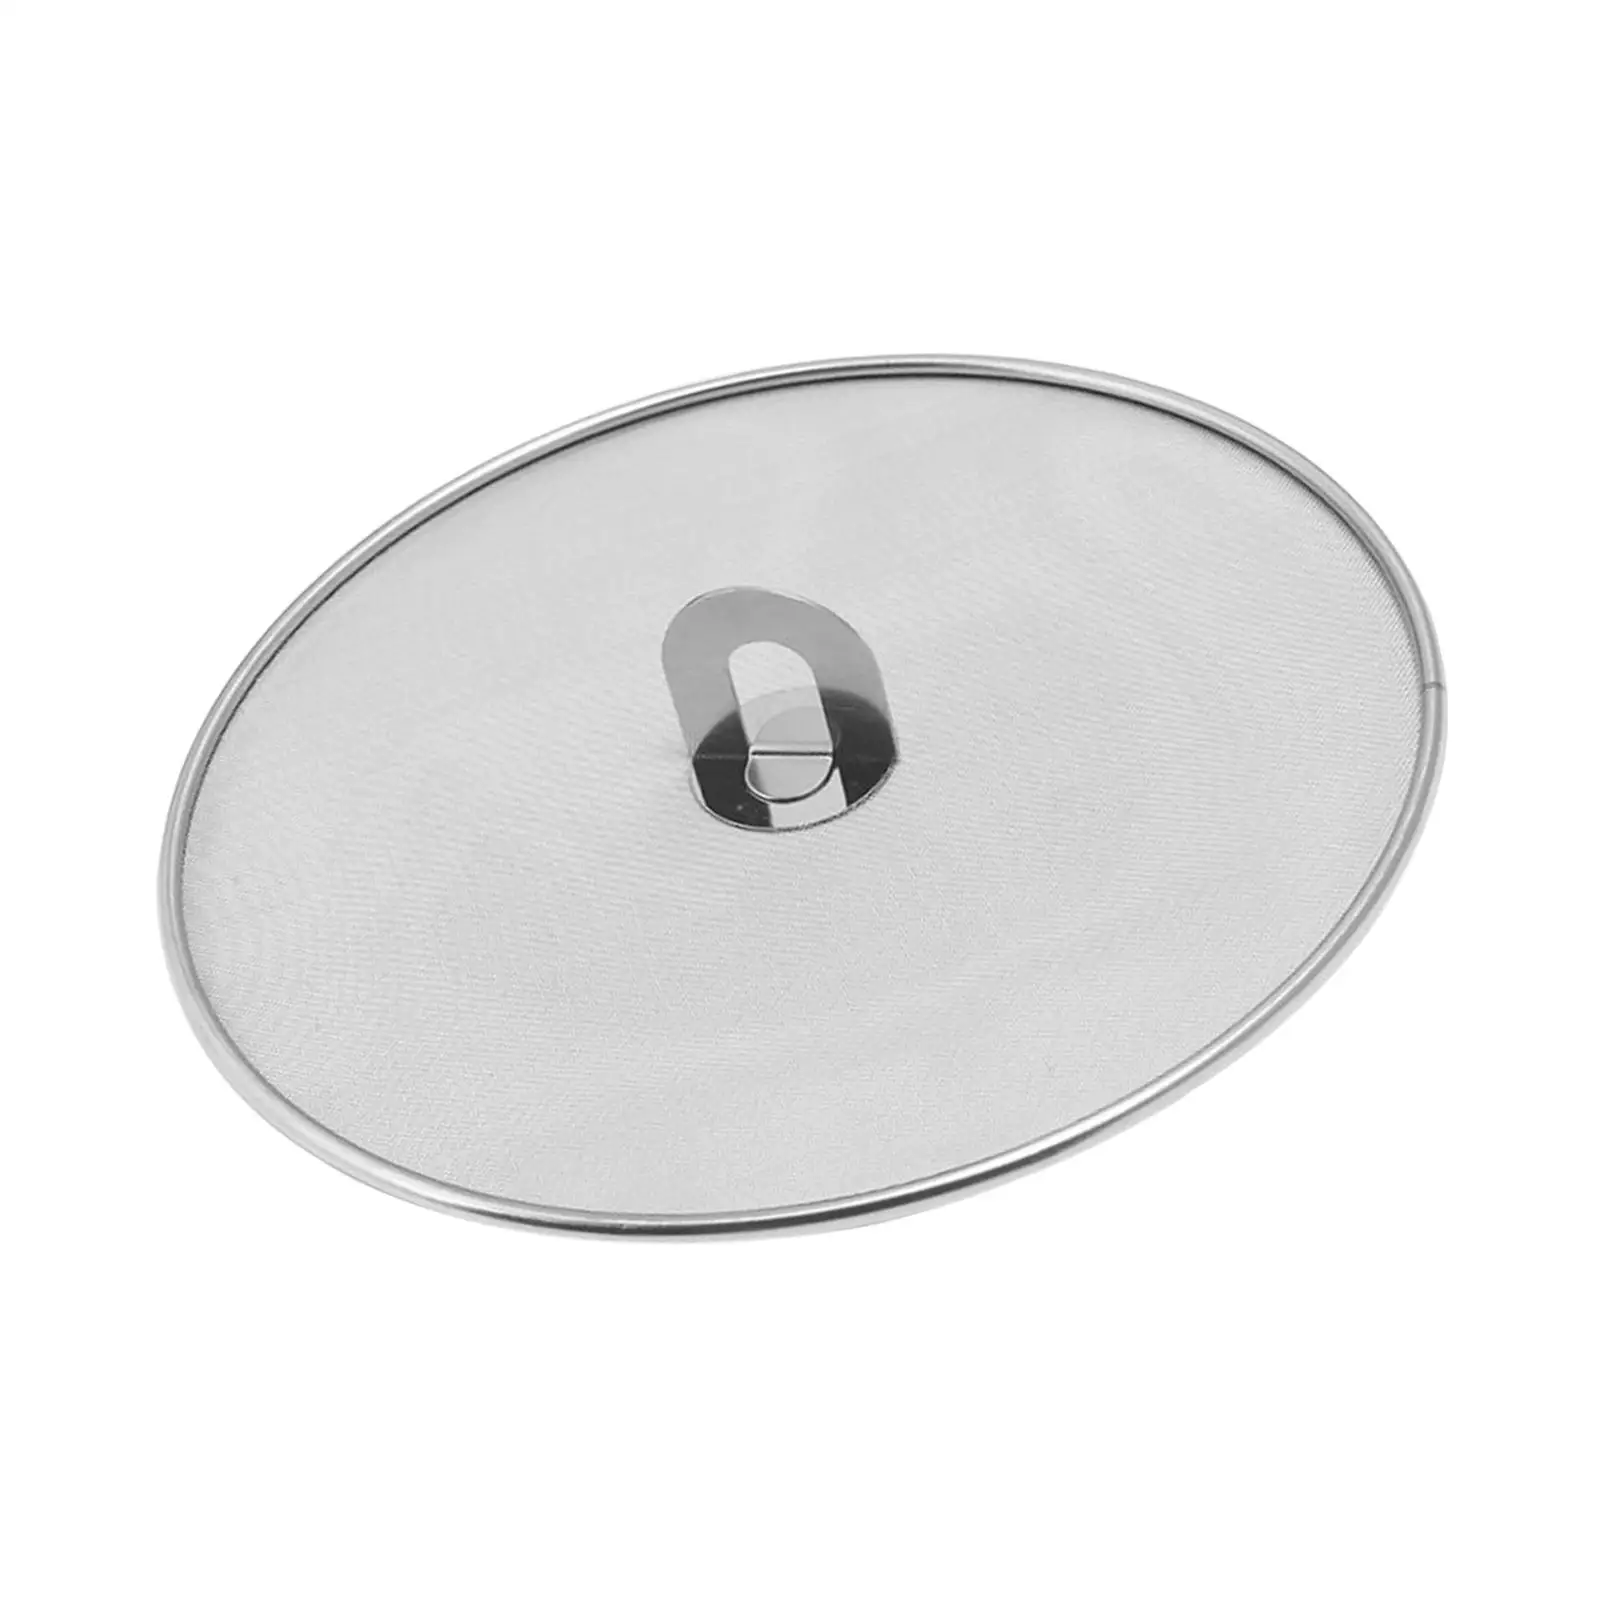 Fine Mesh Stainless Steel Grease Splatter Guard Oil Proofing Lid Cover Accessory with Foldable Handle Compact Size Durable